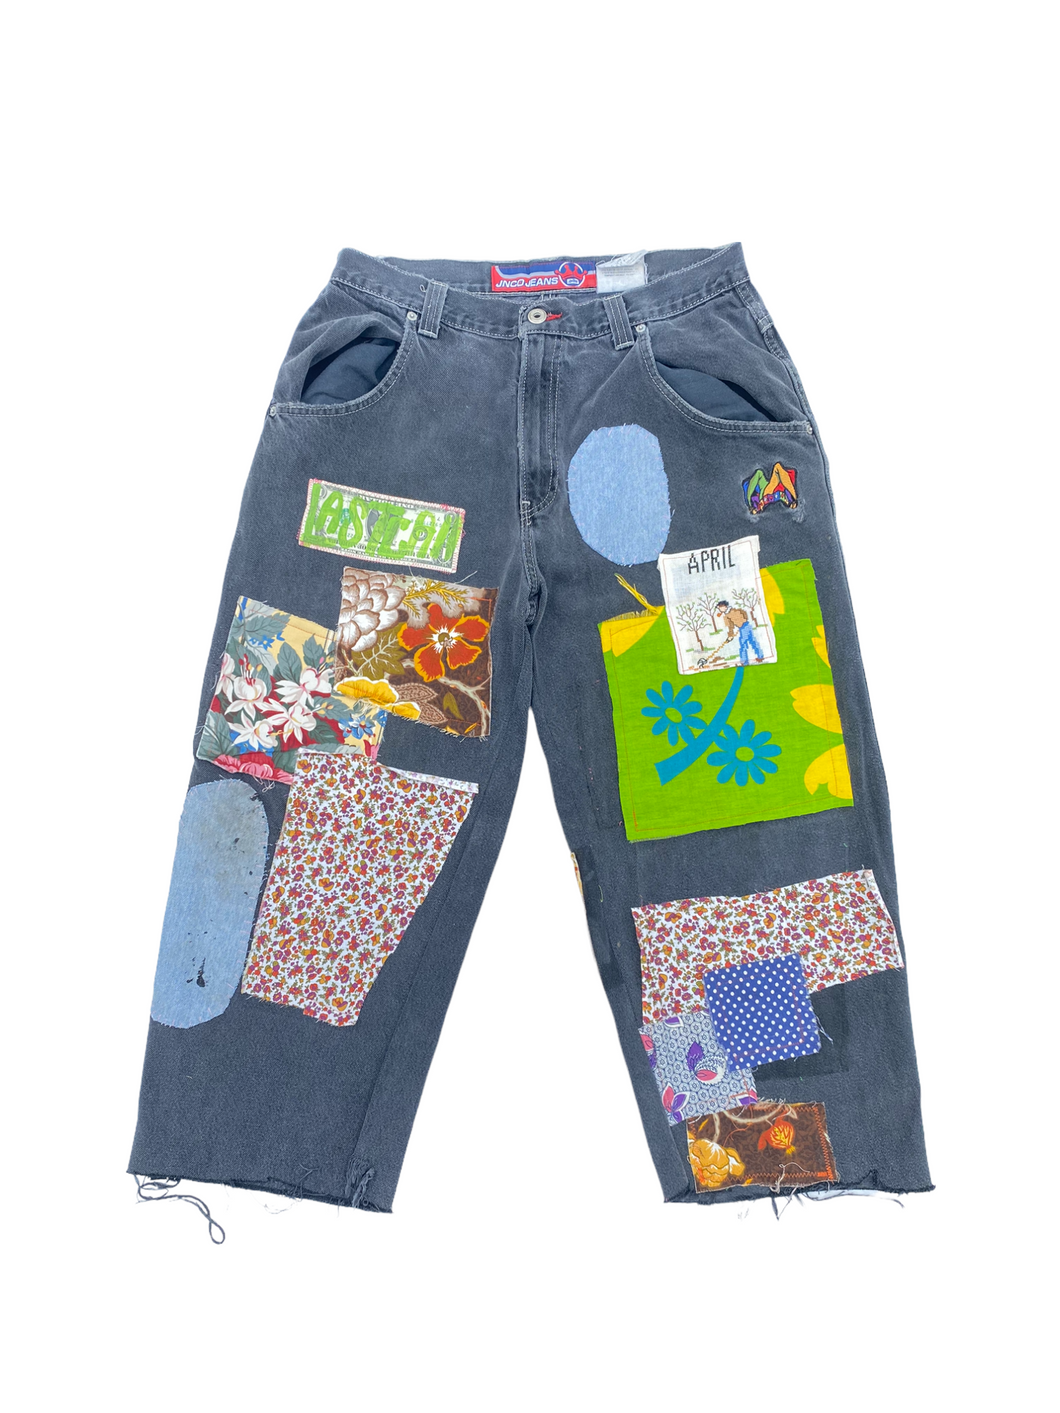 jnco patched up pants